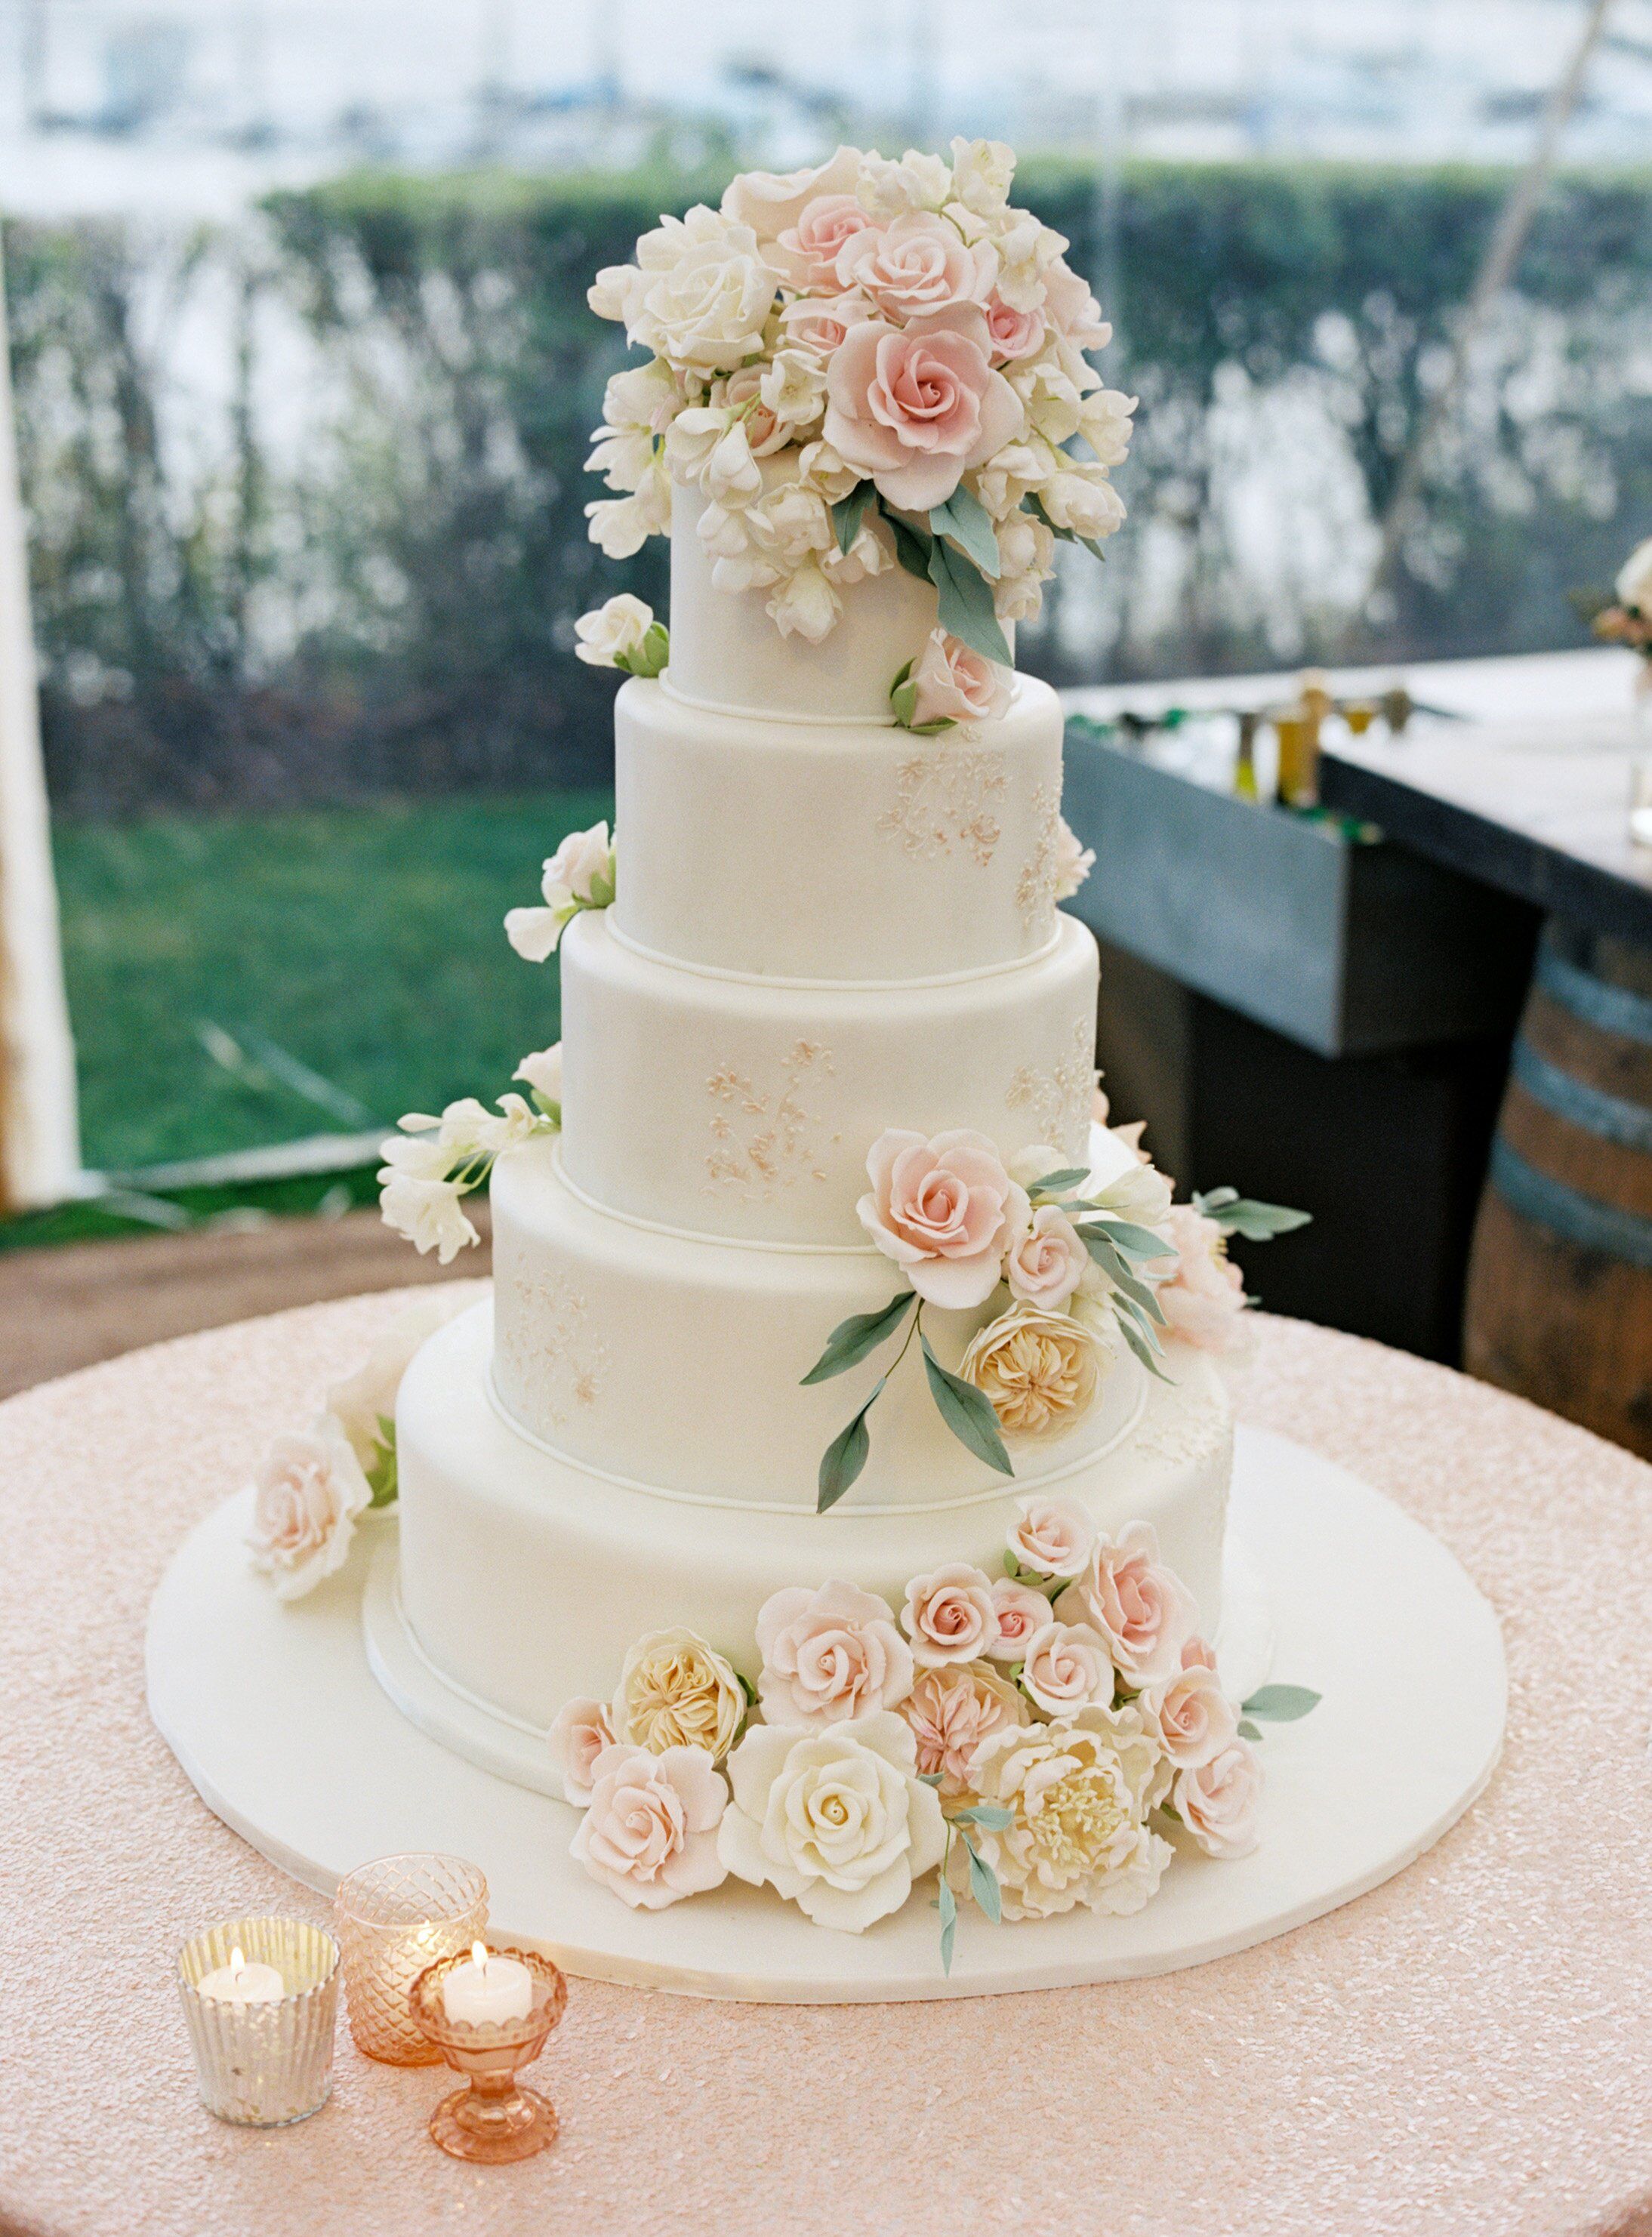 Messages On Wedding Cakes - Wedding Cakes With Flowers: Our Fave Styles ...